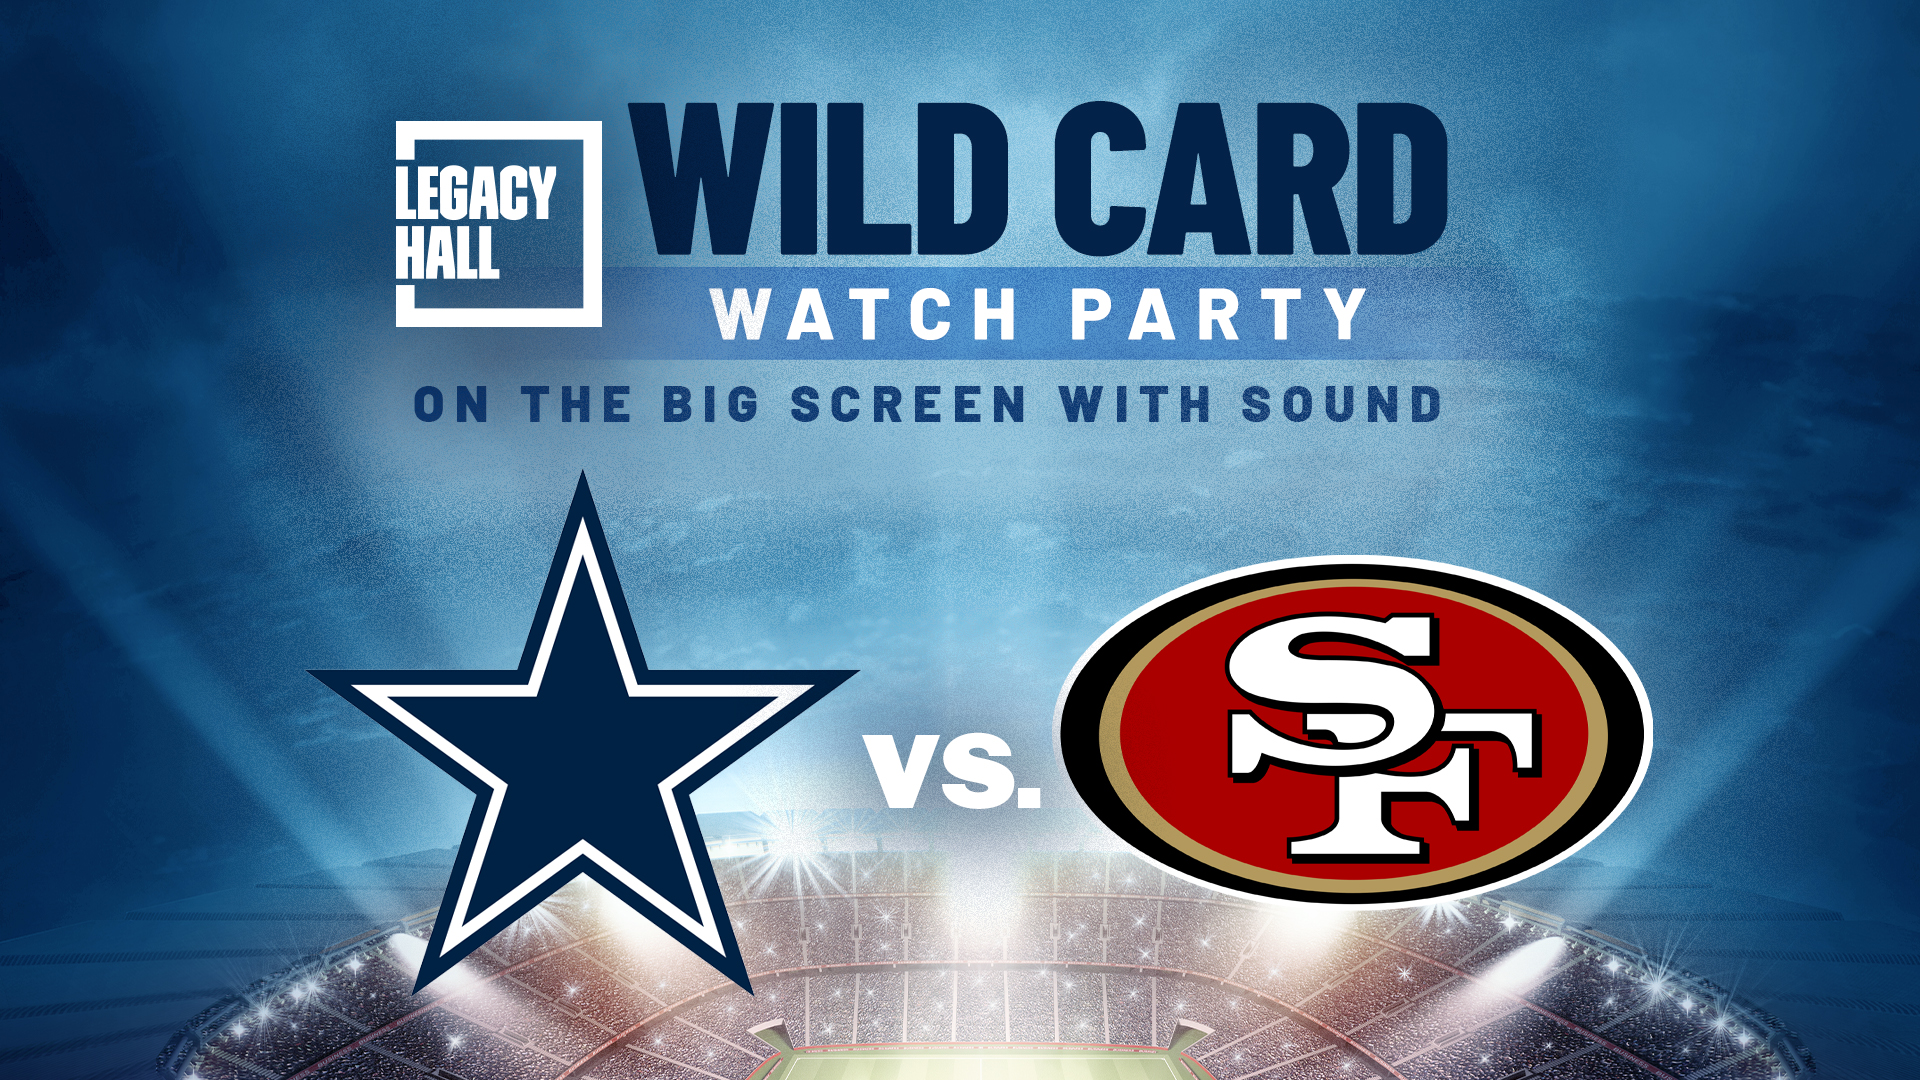 Cowboys v. 49ers Watch Party - hero